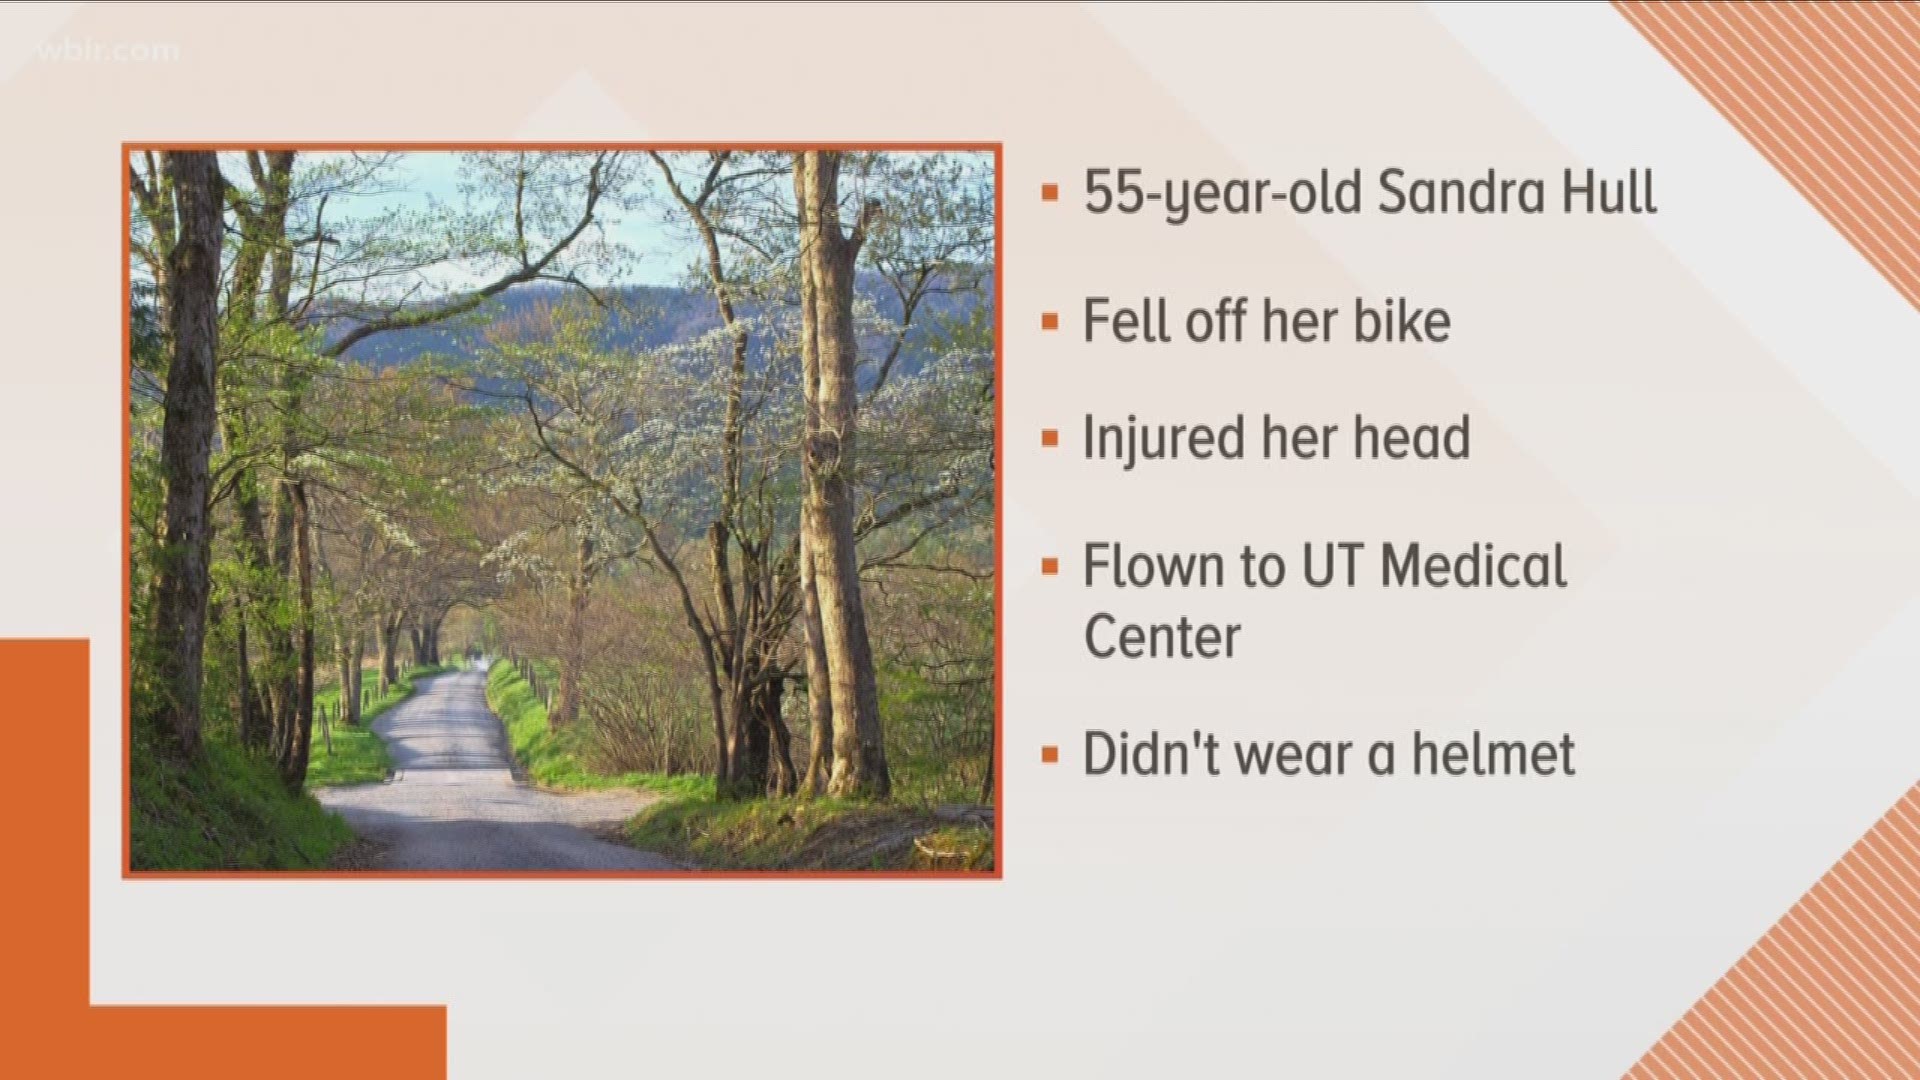 National Park officials say 55-year-old Sandra Hull of Florida fell off her bike along the Cades Cove loop.